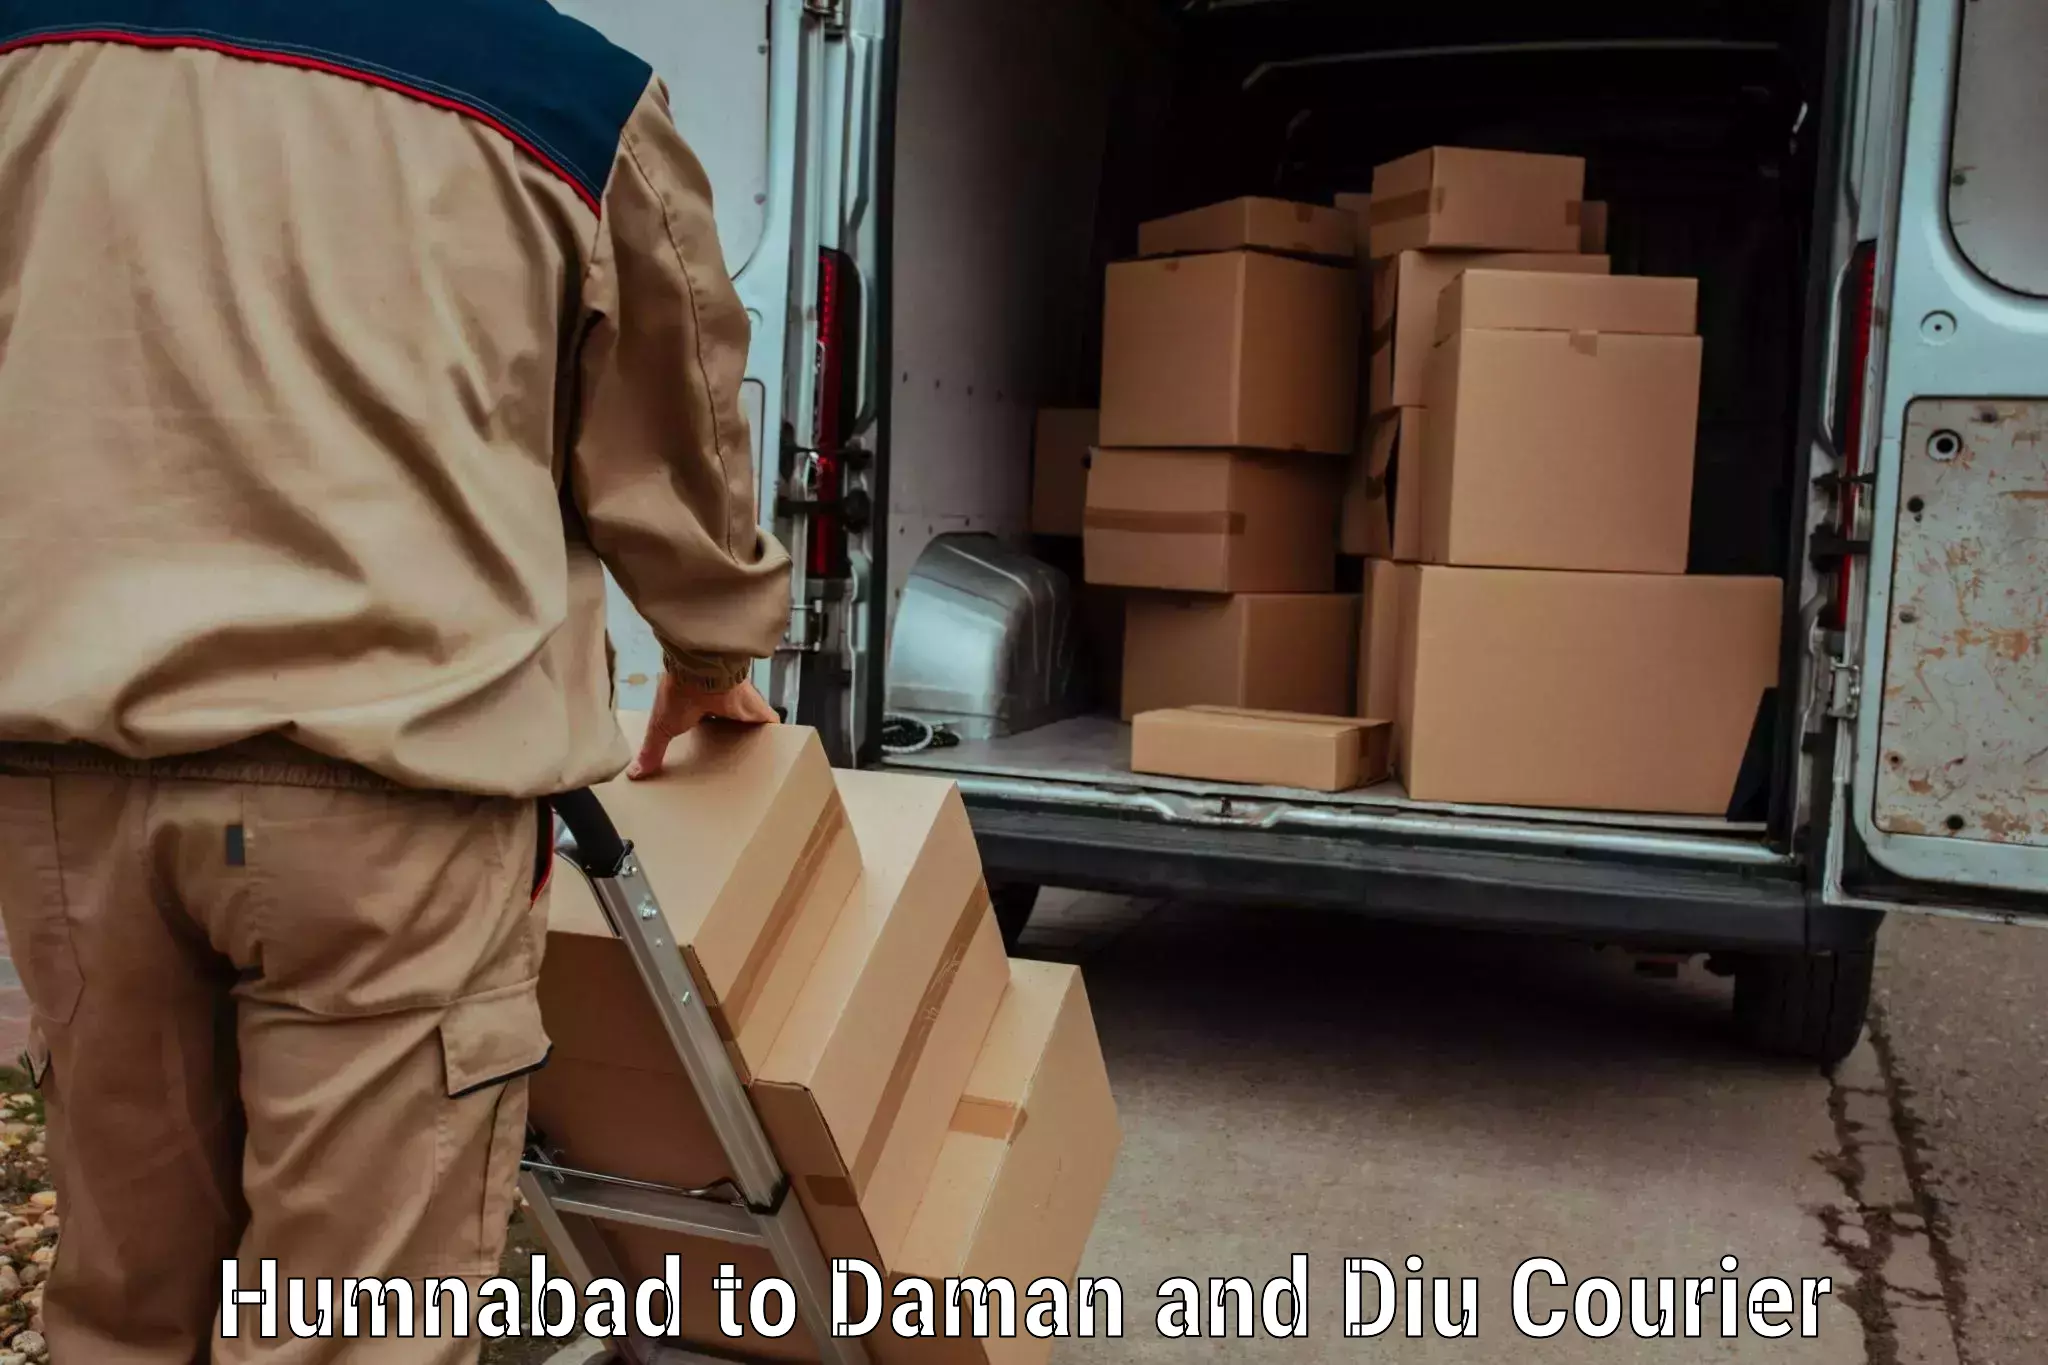 Courier service partnerships Humnabad to Diu